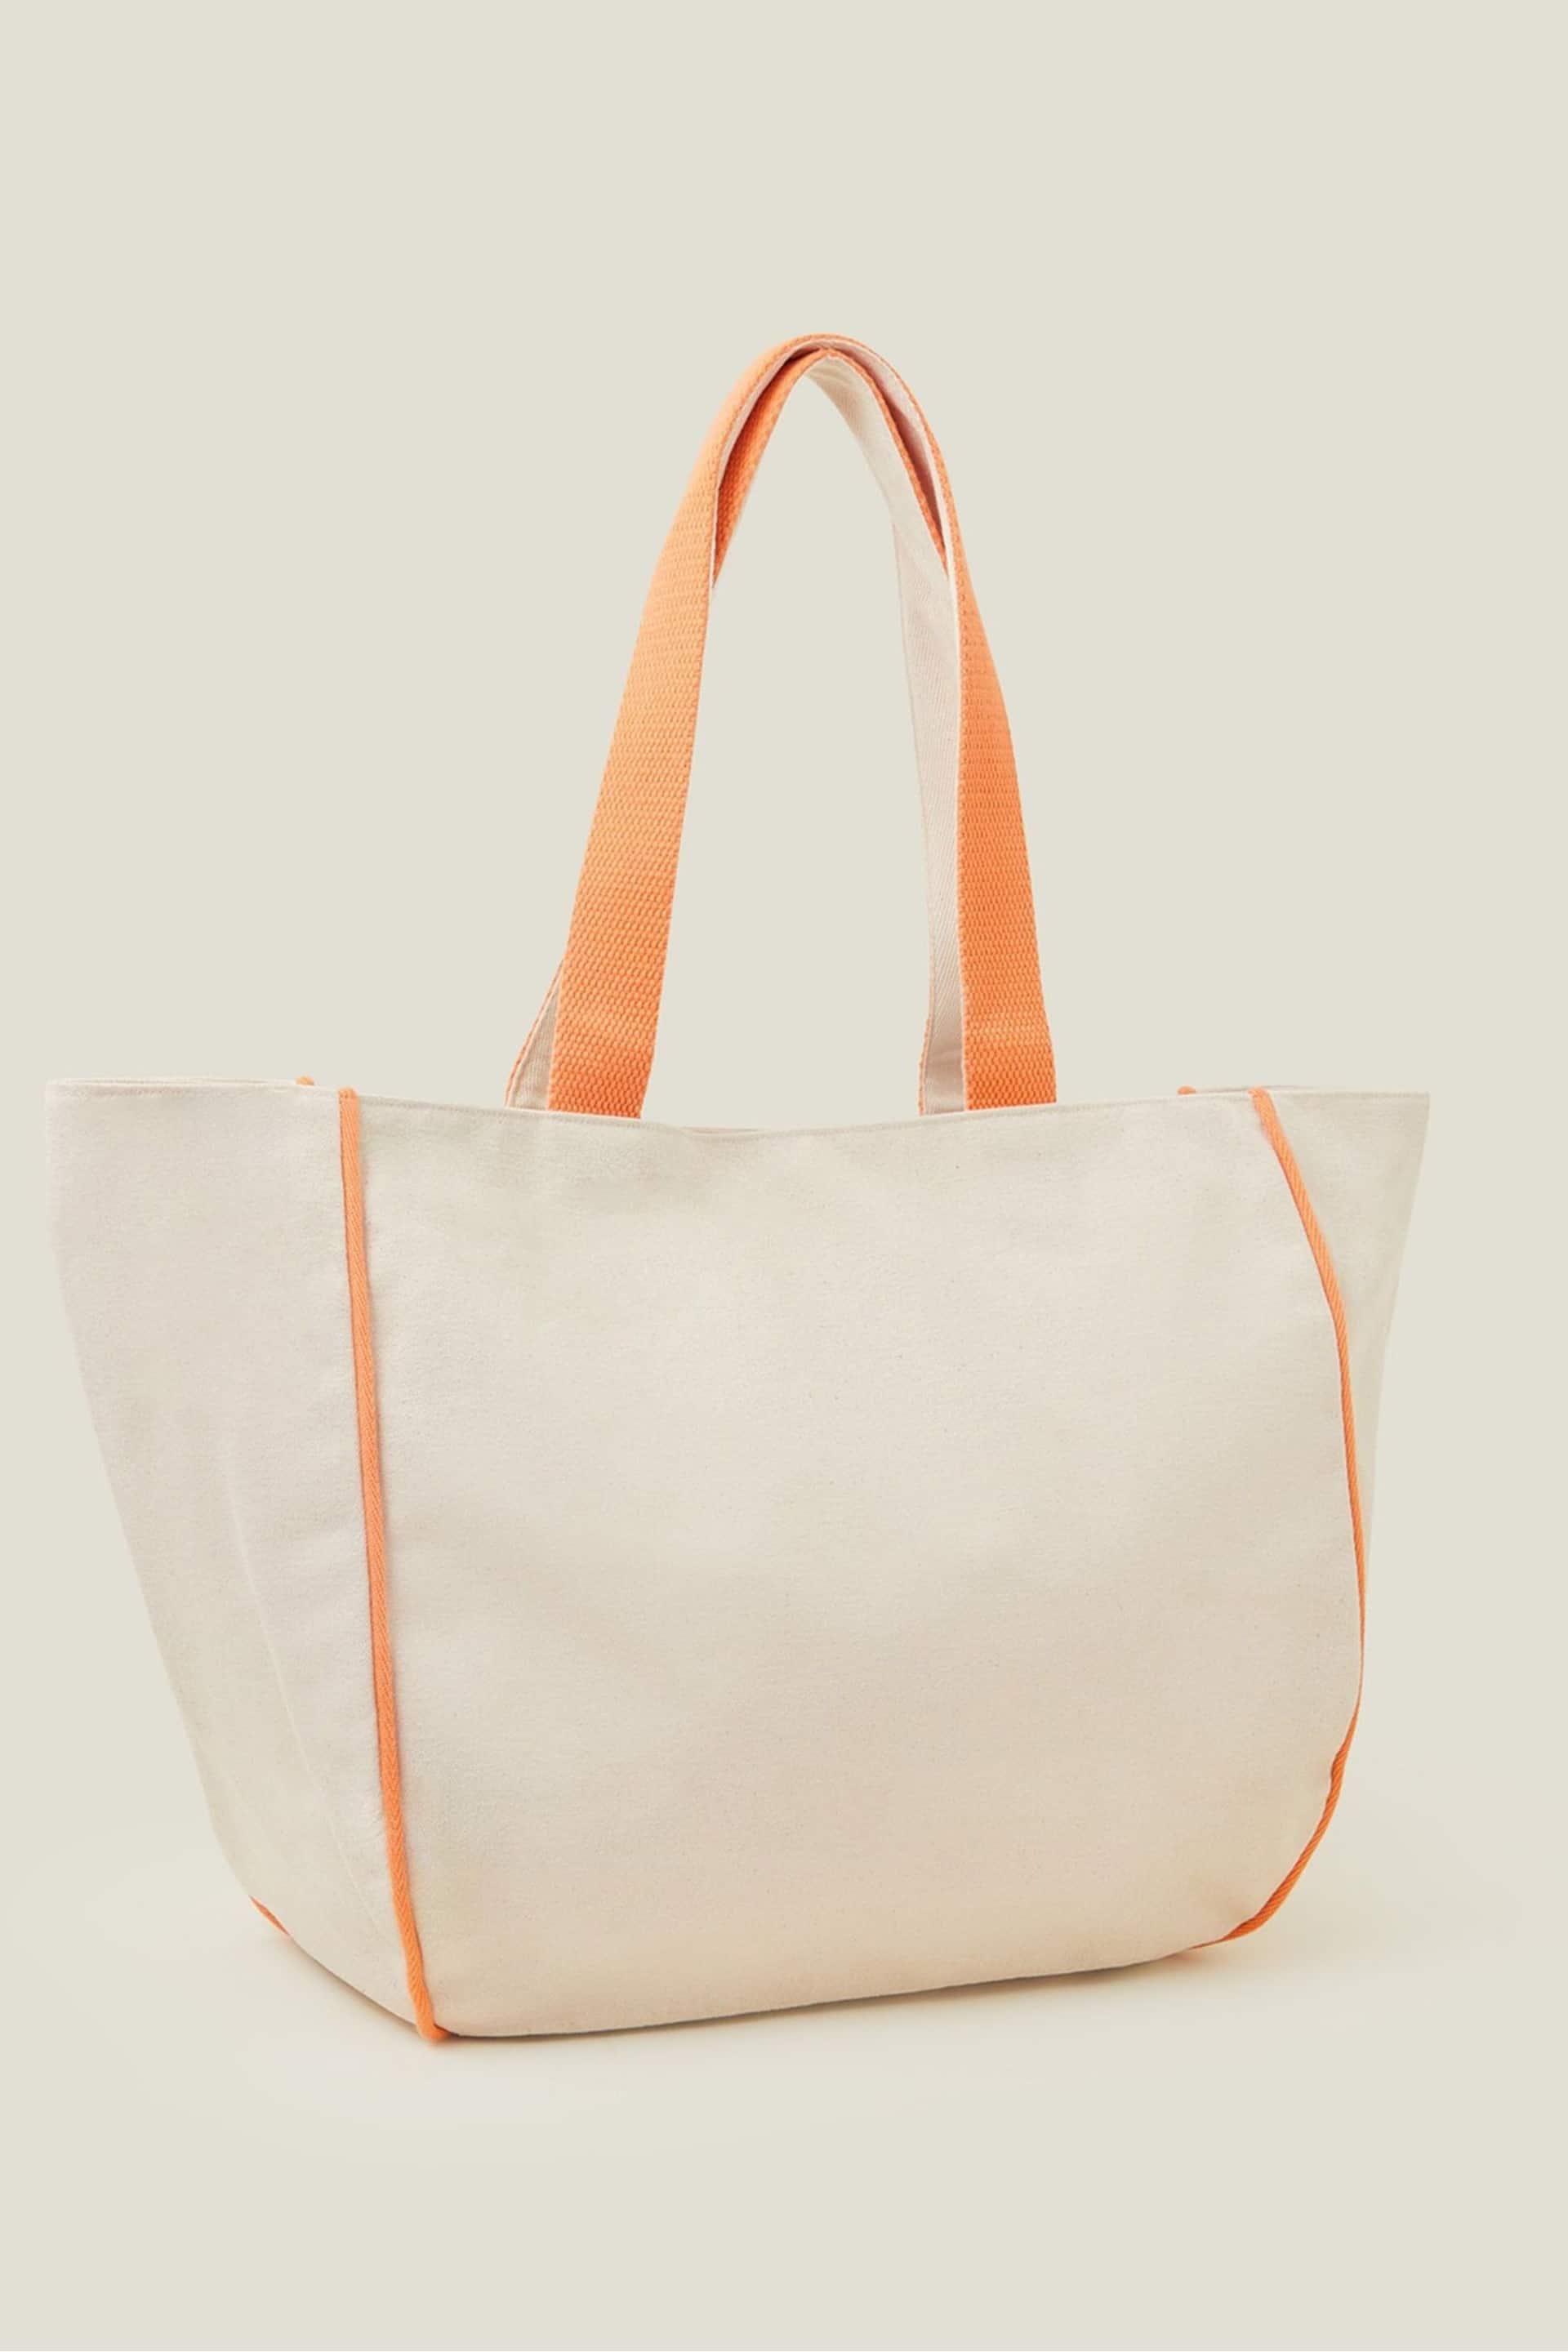 Accessorize Natural Embroidered Tote Bag - Image 3 of 3